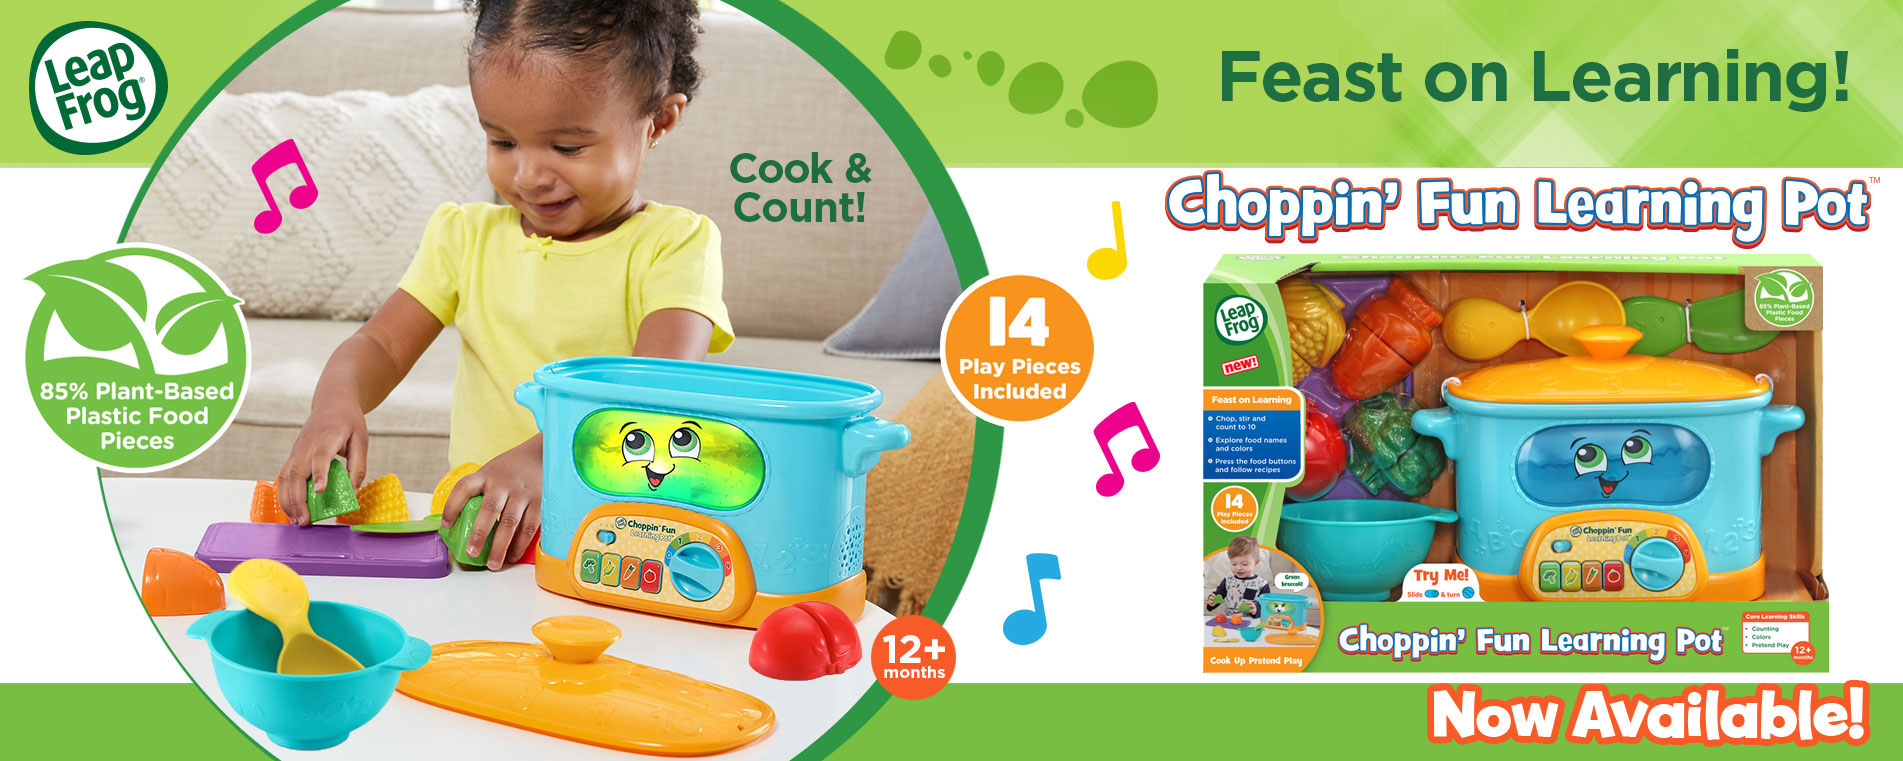 Leap Frog Cooking Pot